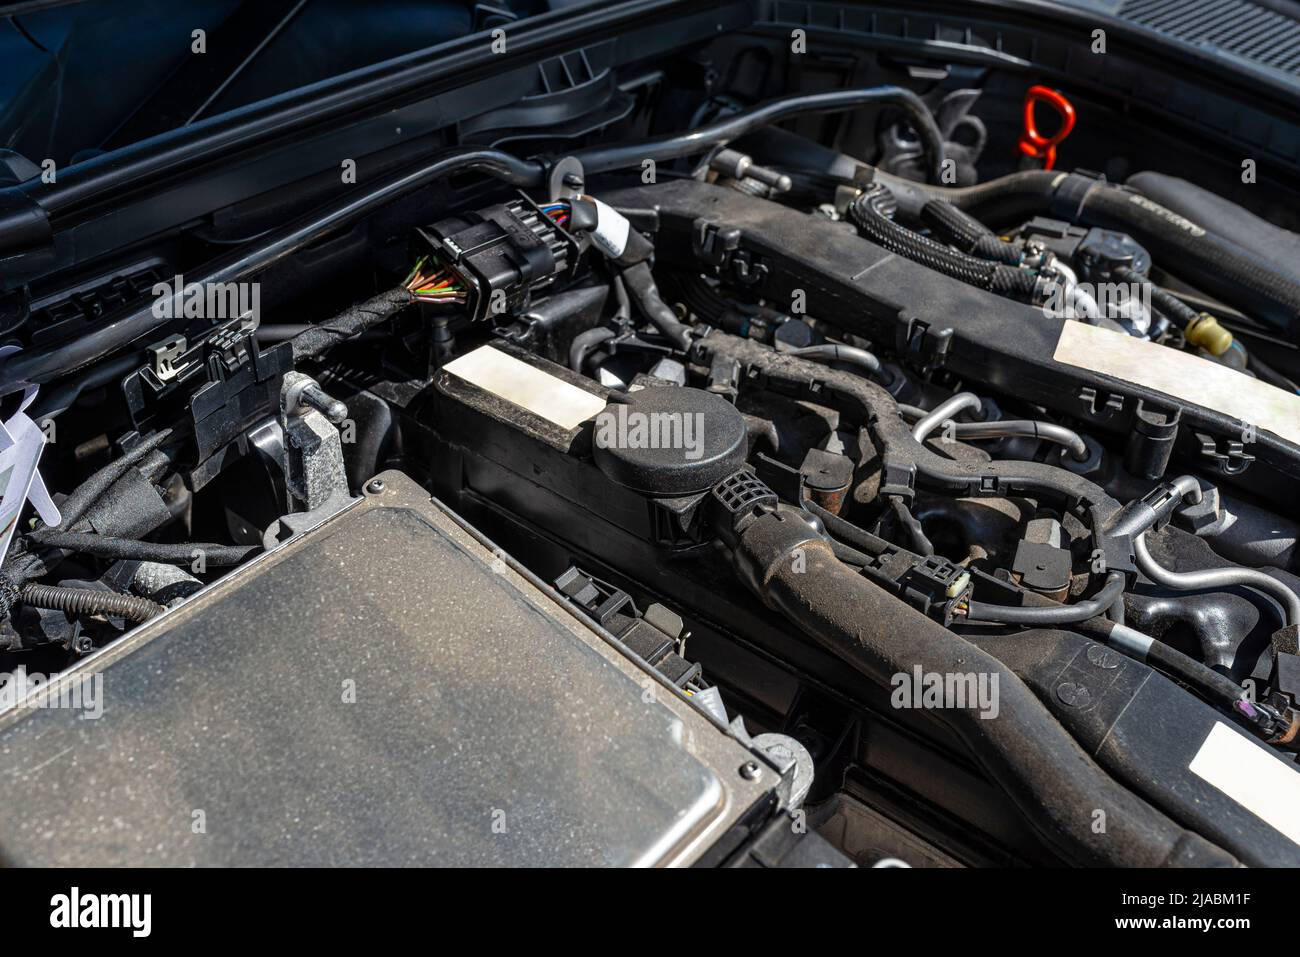 A modern diesel engine with 170 horsepower and an engine capacity of 2.2 liters. Visible engine equipment, spark plugs and electric wires. Stock Photo